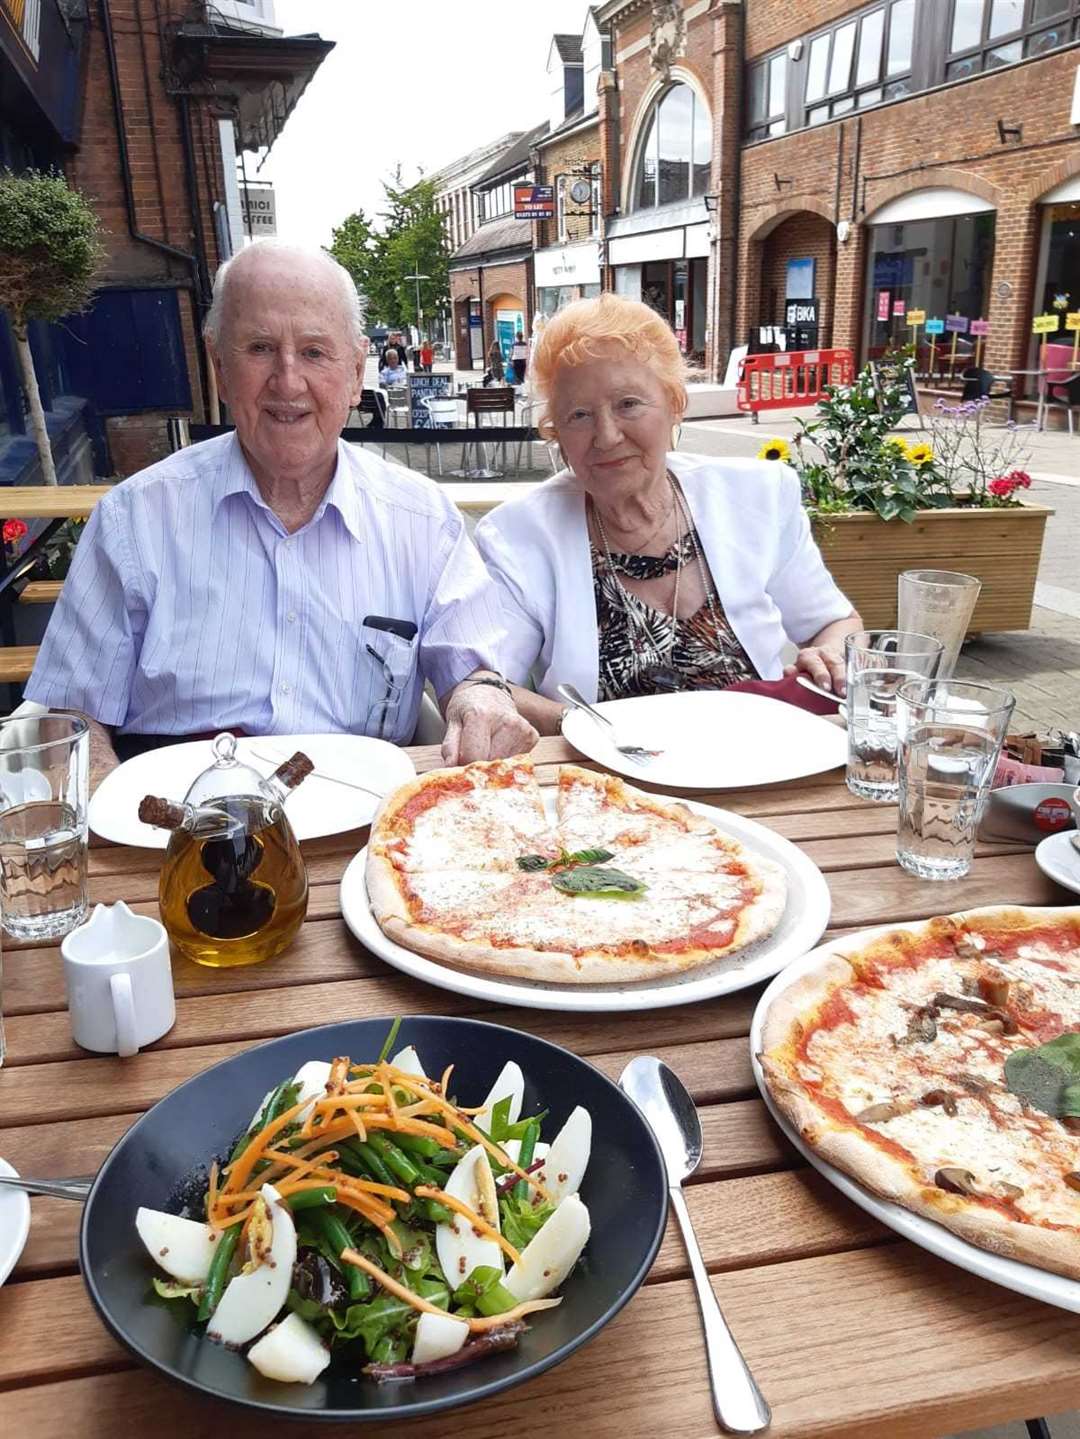 Geoff and Betty Cloke enjoy a meal out in Gravesend as part of the Eat Out to Help Out scheme, designed to bring people back to restaurants and cafes in August. Restaurant goers in the county enjoyed more than a million meals through the scheme.